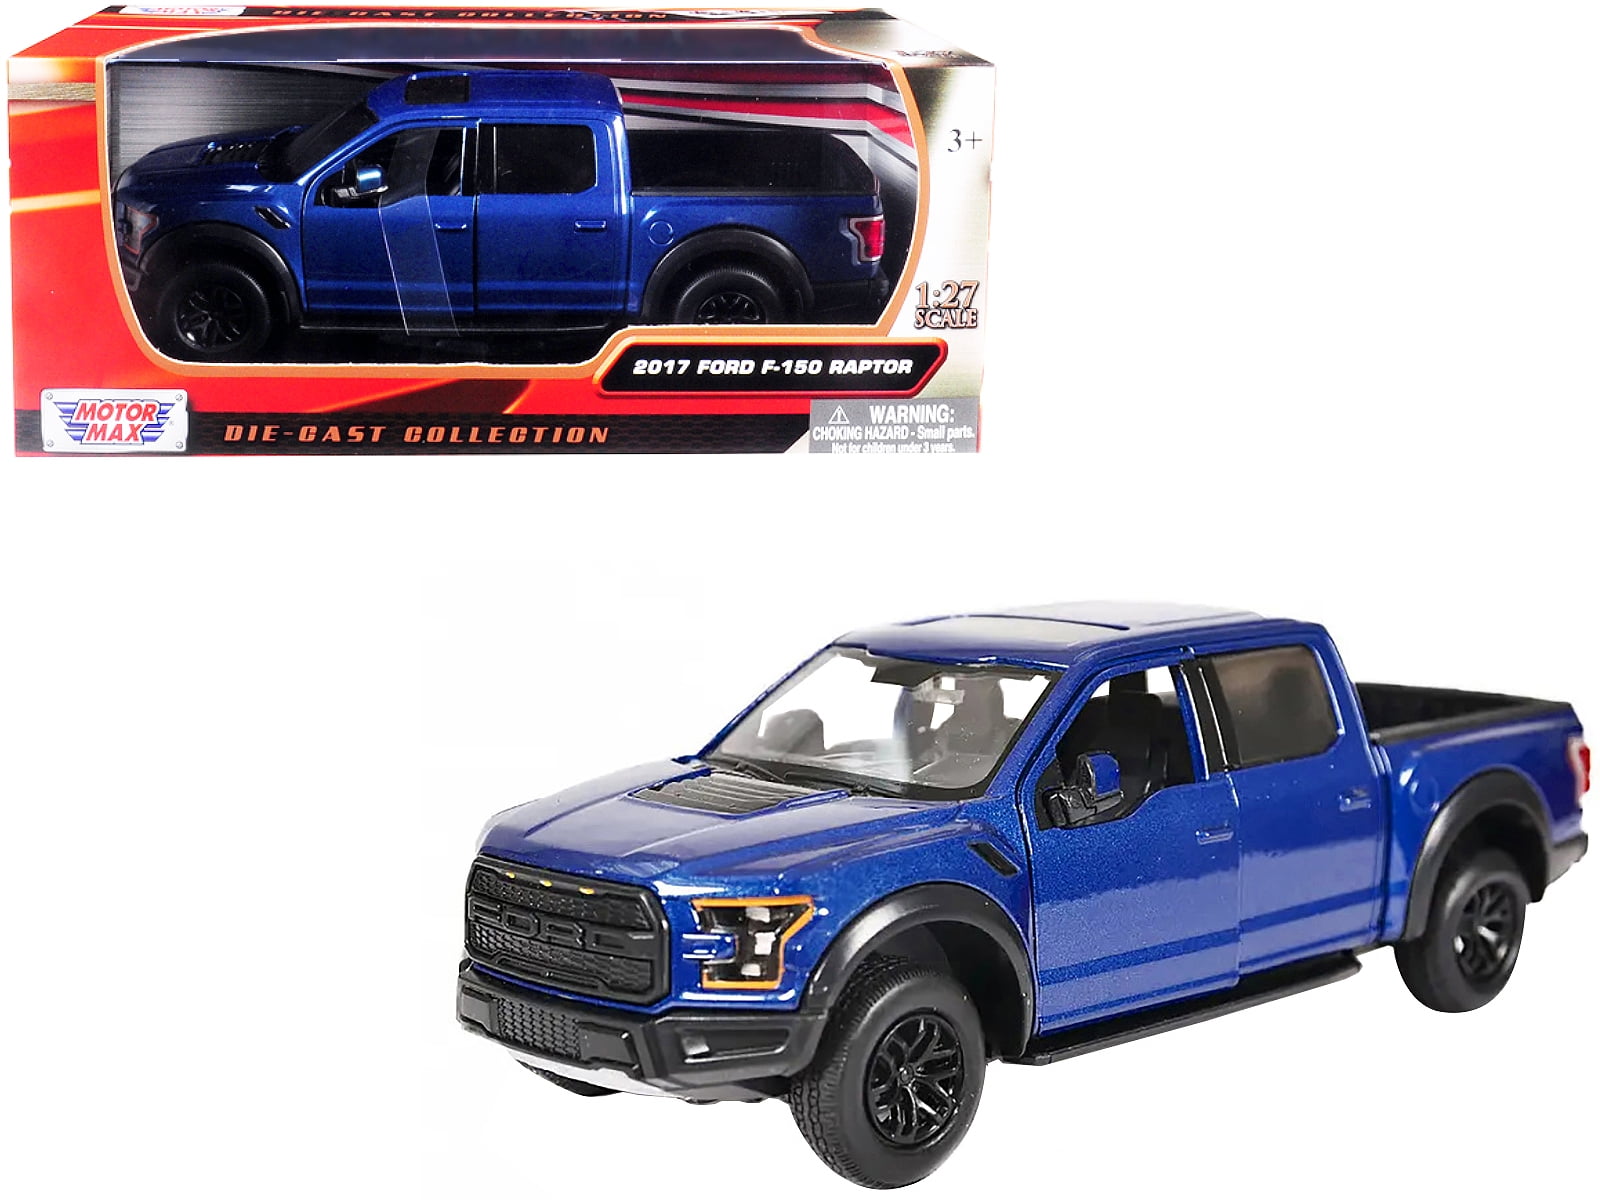 2017 '17 FORD F150 RAPTOR PICKUP TRUCK FORD PERFORMANCE HOT WHEELS DIECAST 2017